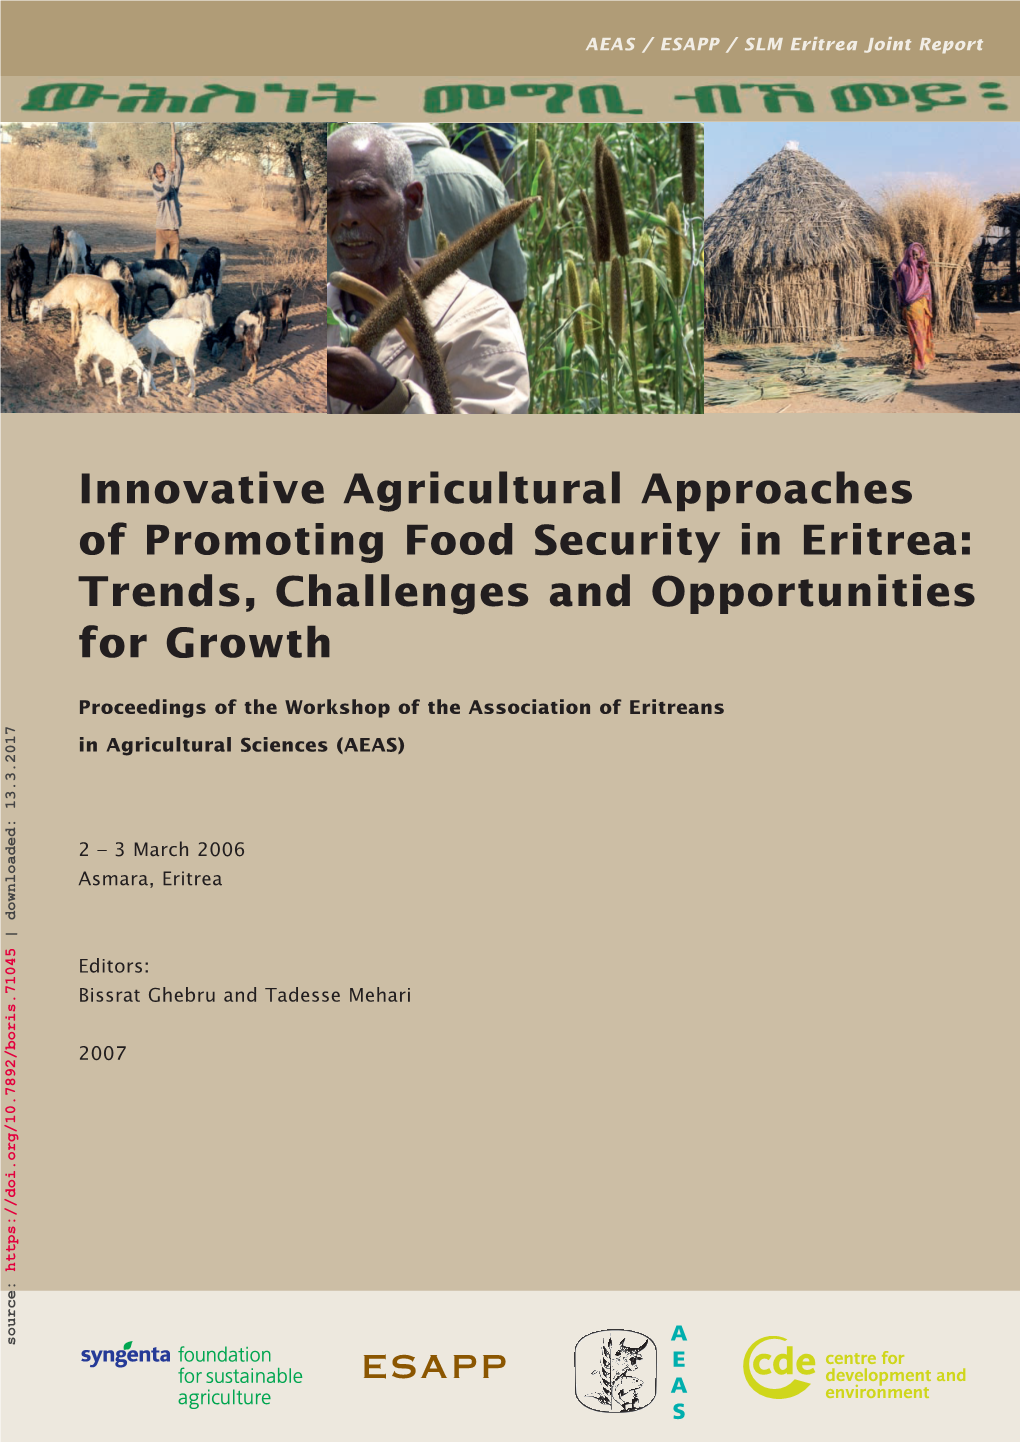 Innovative Agricultural Approaches of Promoting Food Security in Eritrea: Trends, Challenges and Opportunities for Growth